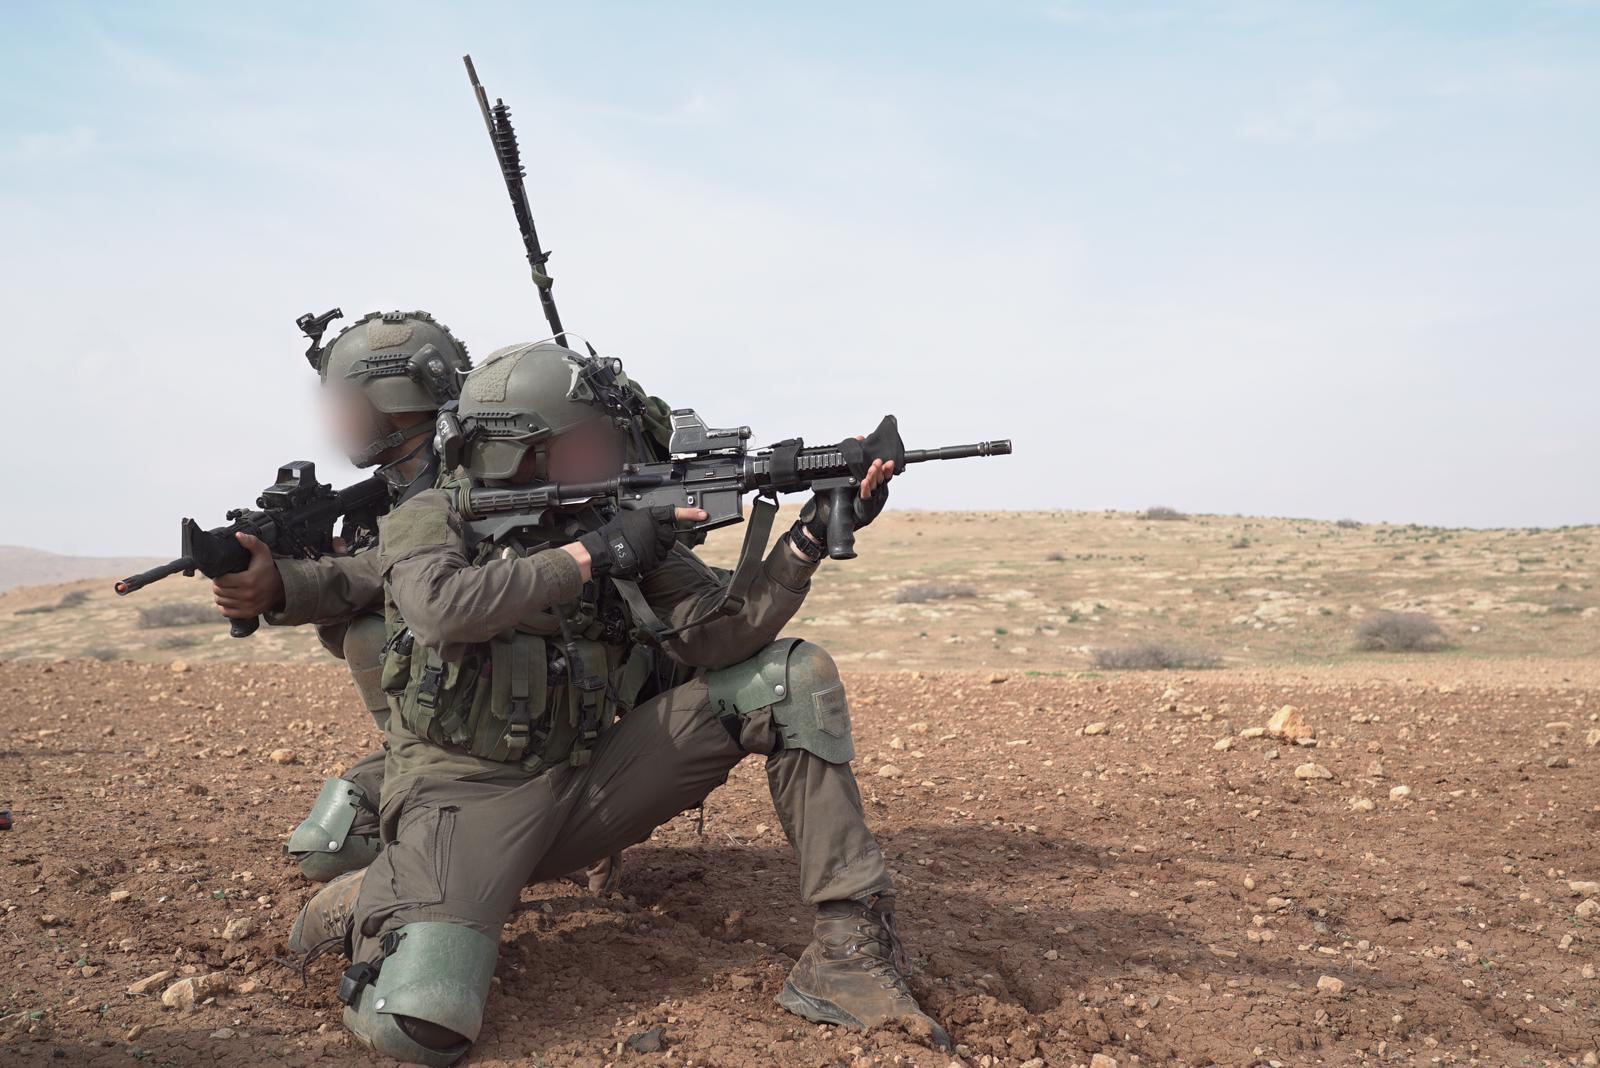 2 IDF commandos injured as grenade explodes in apparent training accident